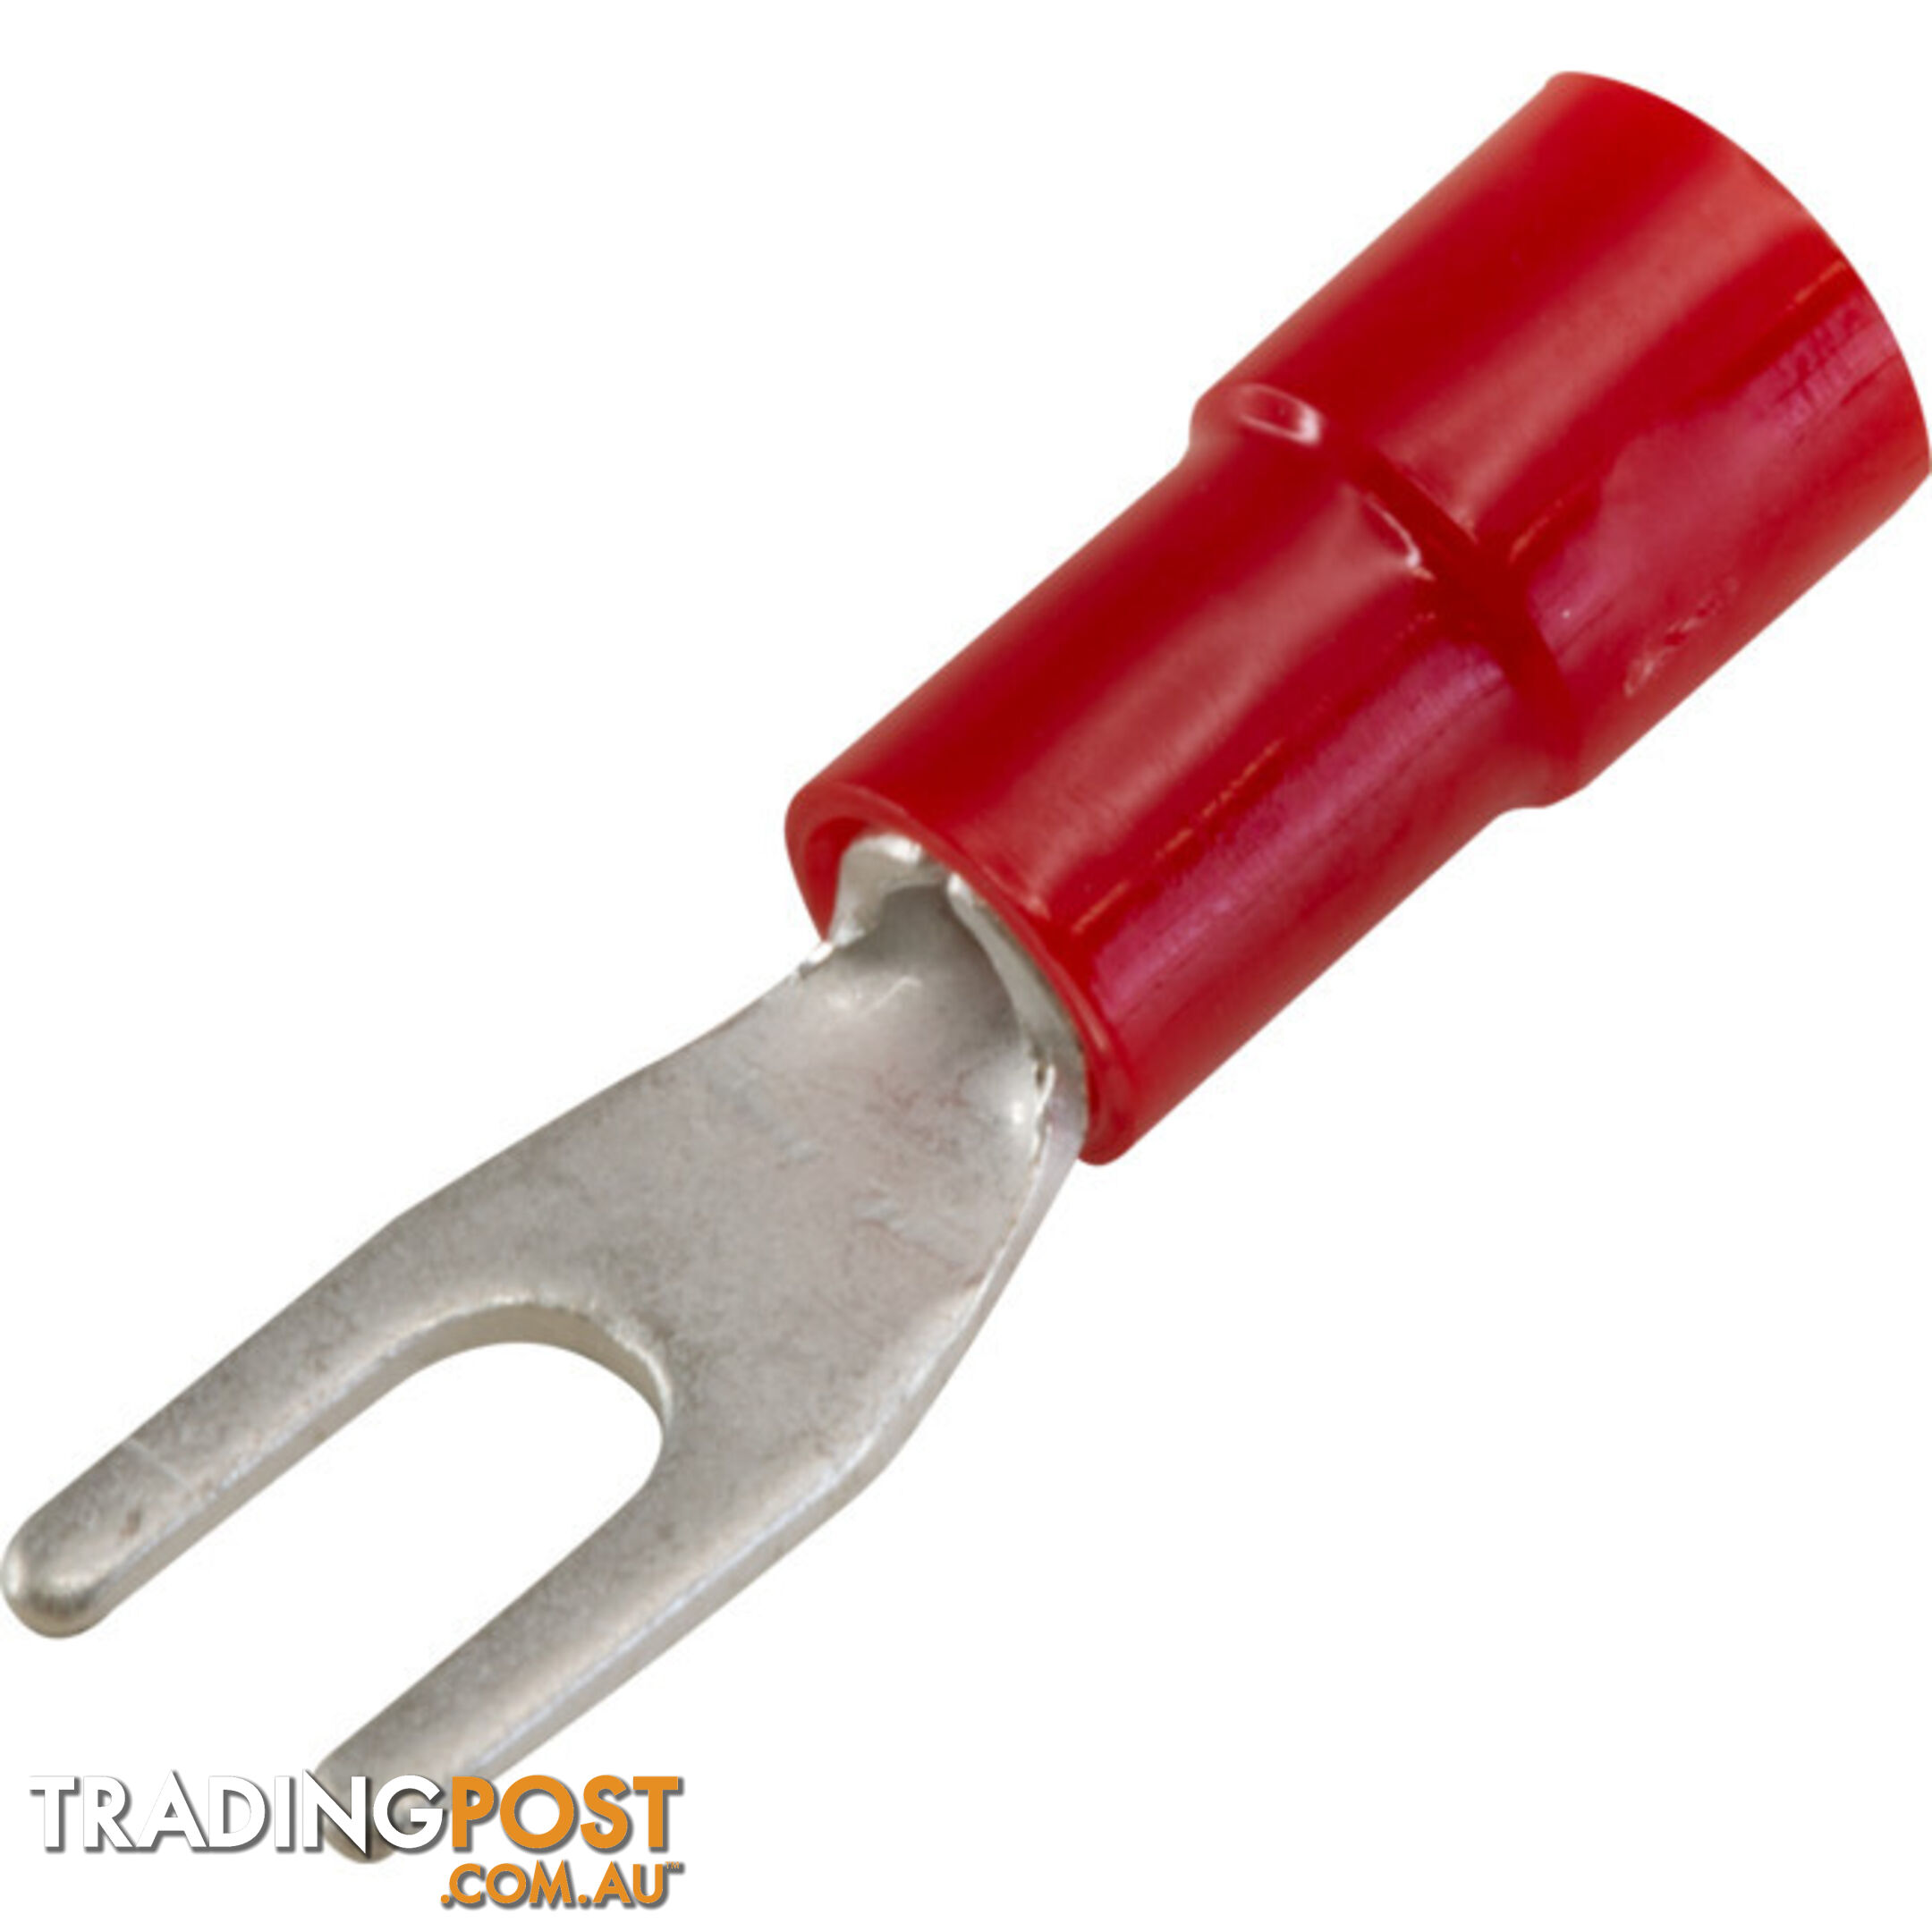 FS1.25-3-100 FORKED SPADE TERMINAL - RED 100PK WIRE RANGE 0.5-1MM SQUAR